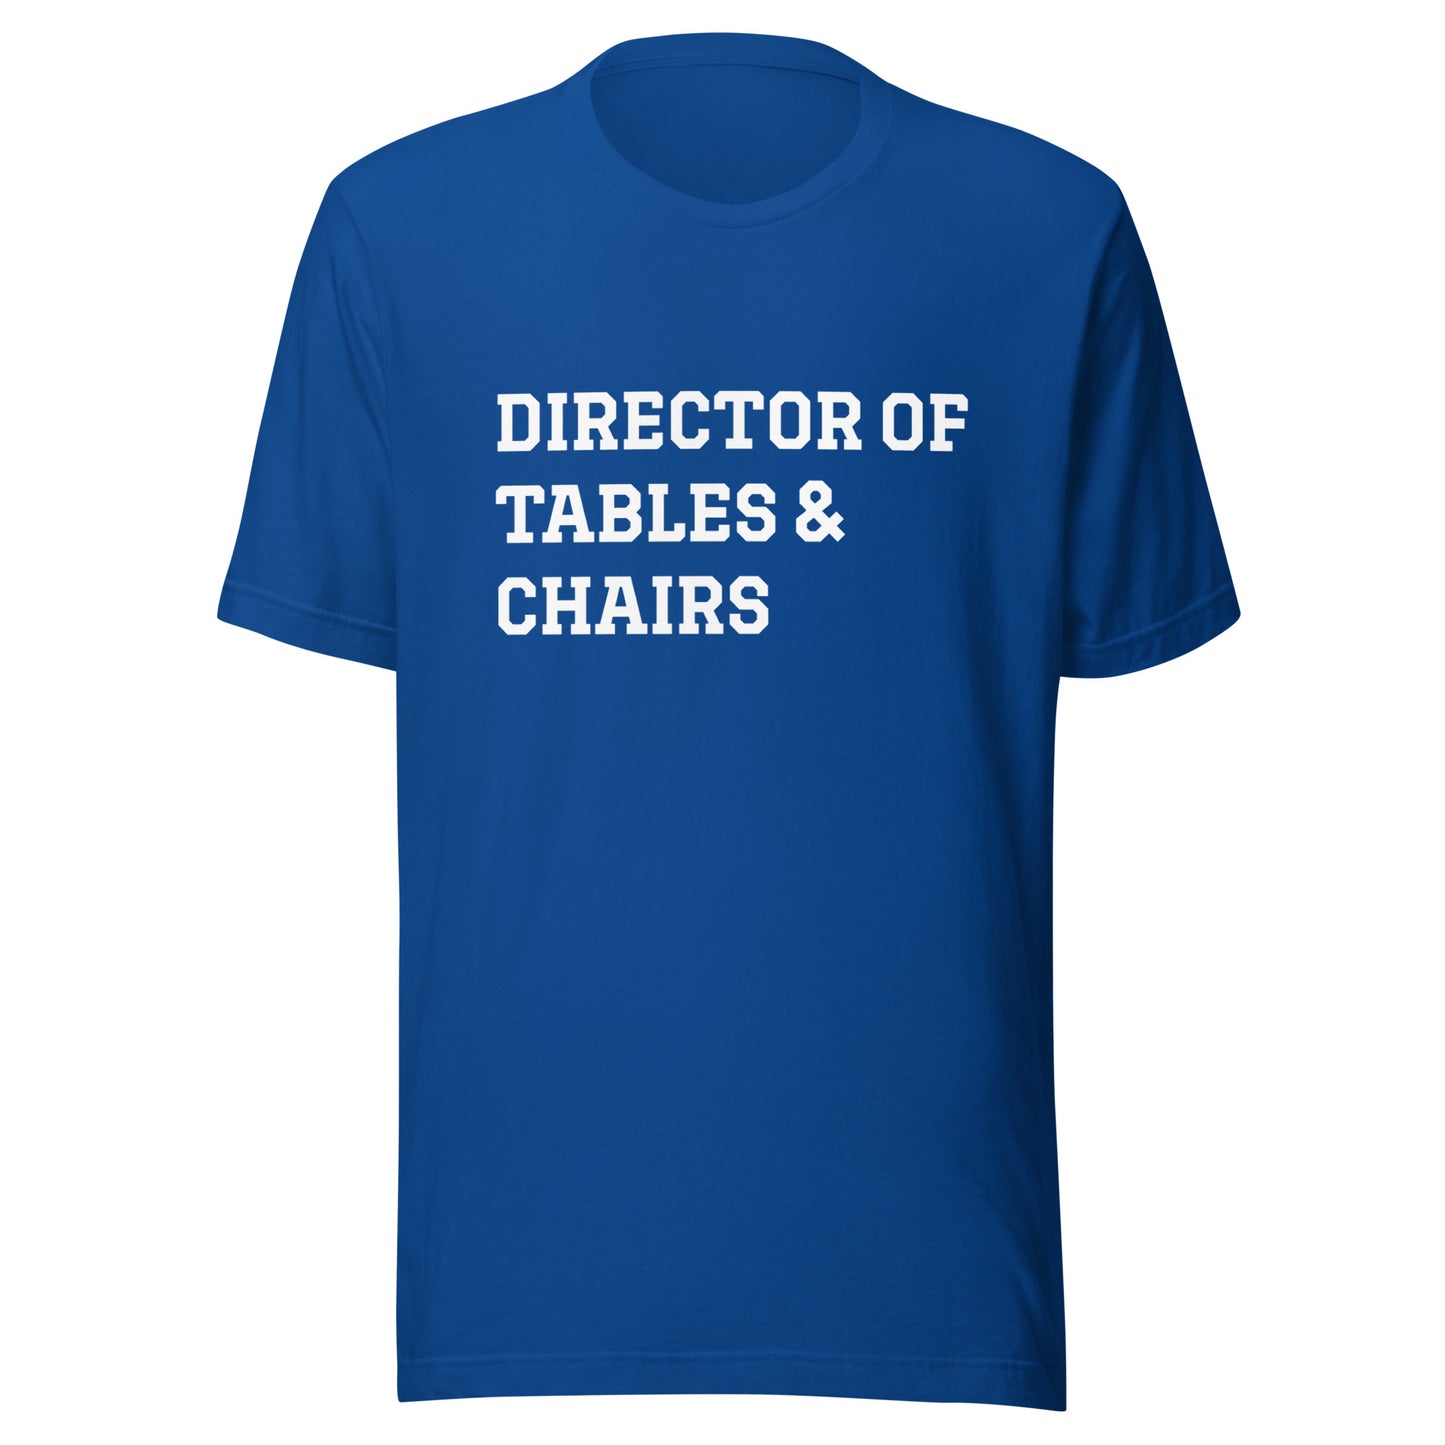 Director of Tables & Chairs